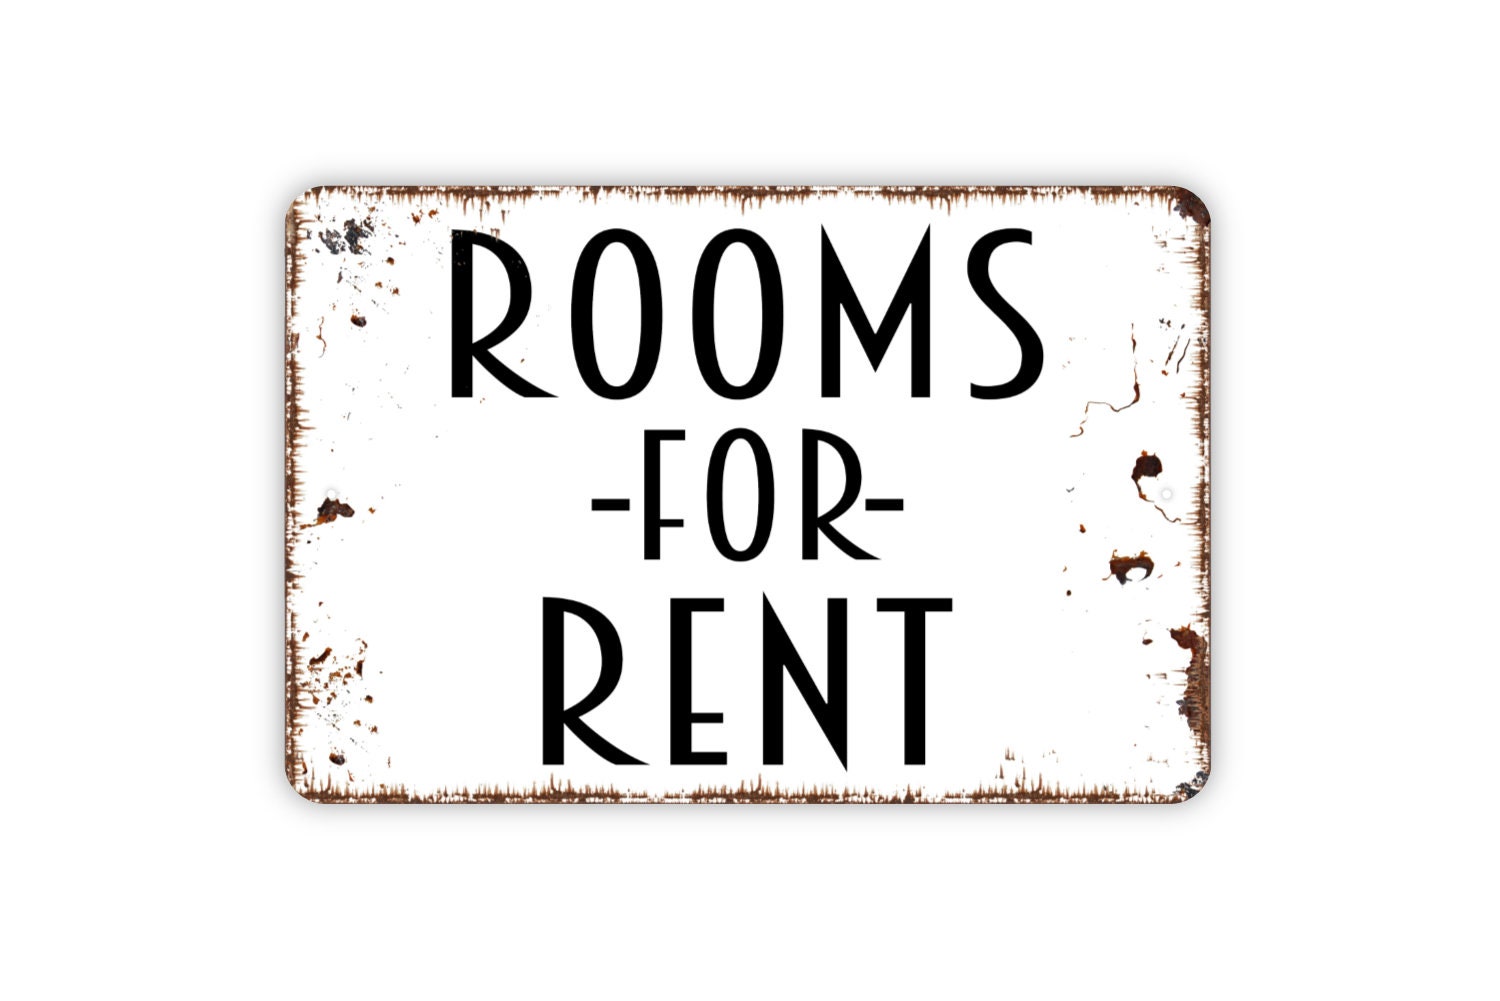 Rooms for rent –